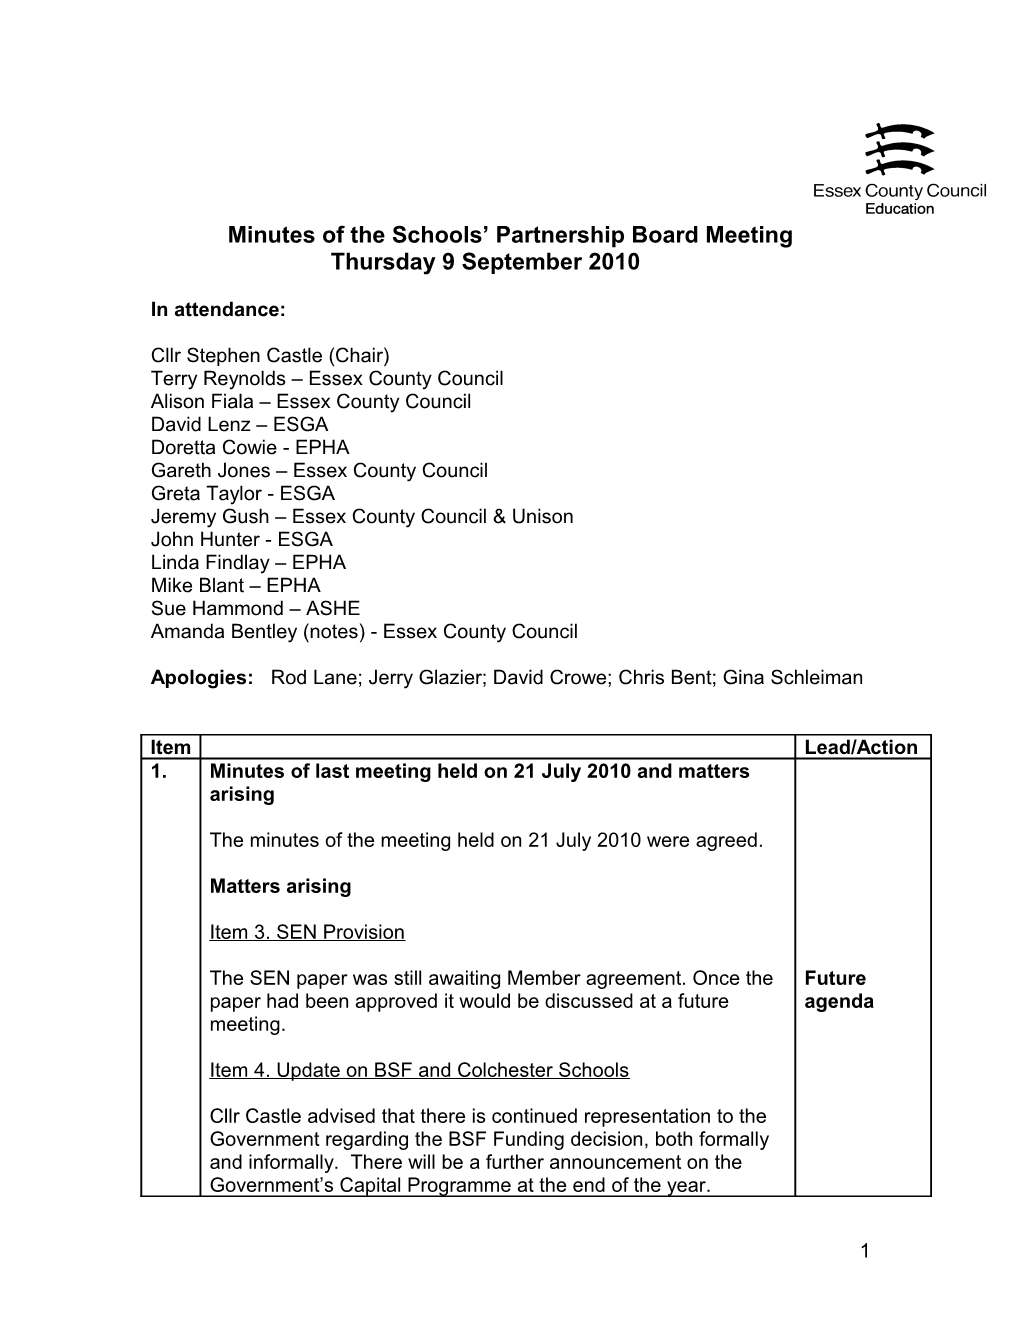 Minutes of the Schools Partnership Board Meeting